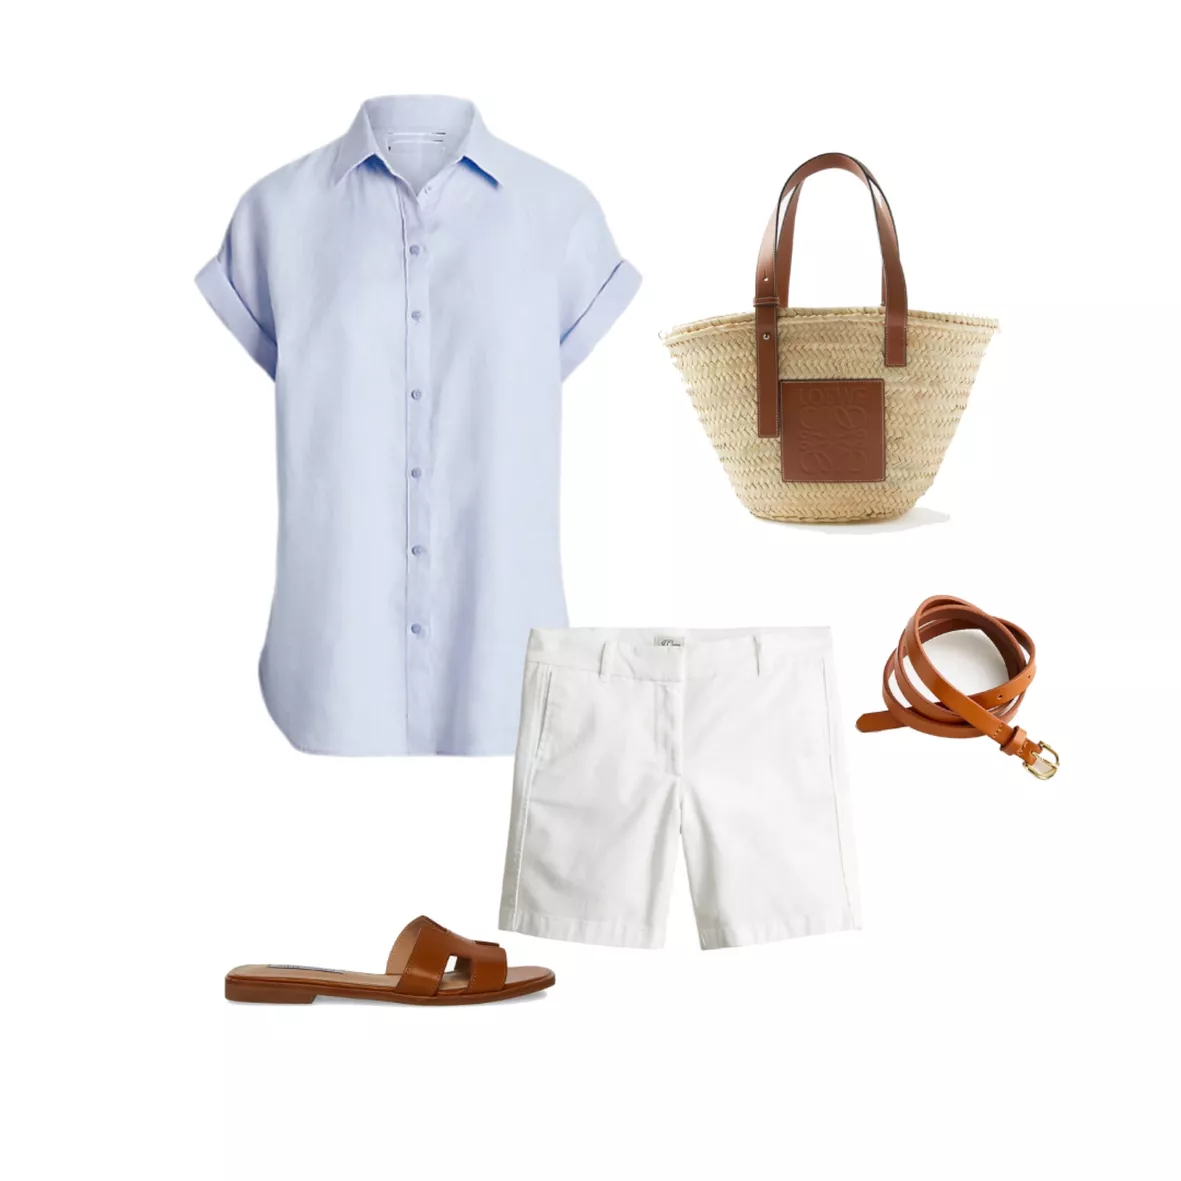 FLAX for a Stylish Summer!